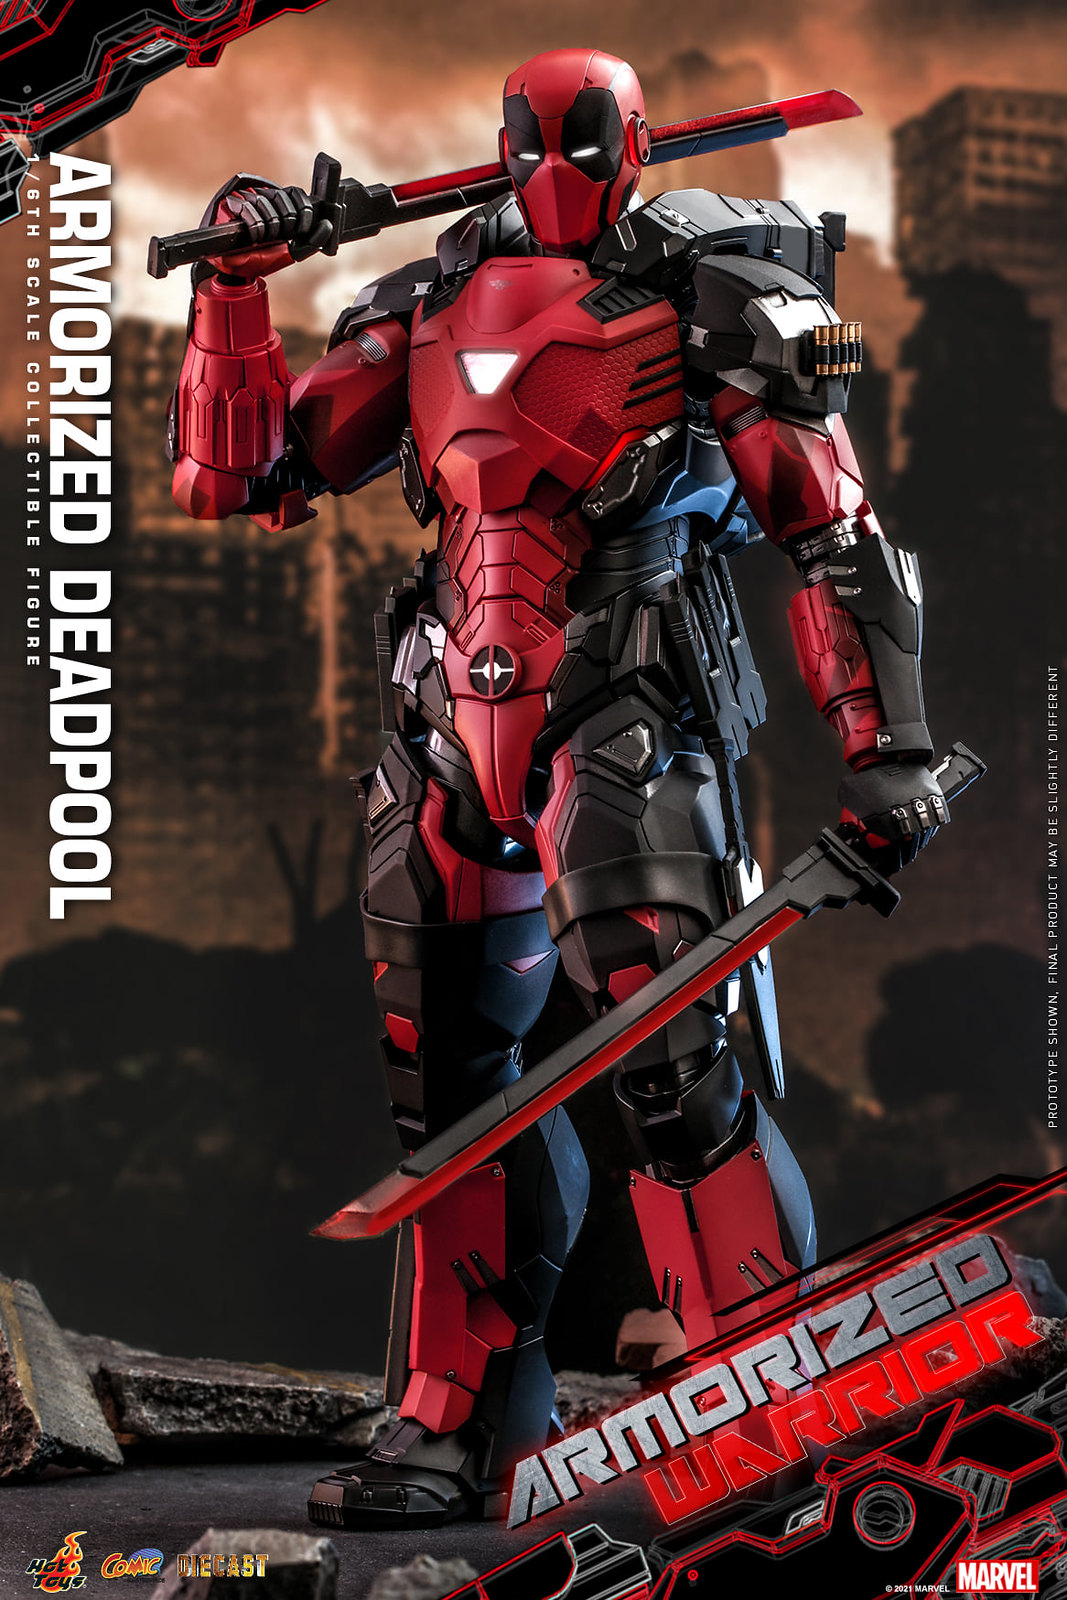 NEW PRODUCT: Hot Toys Armorized Warrior - 1/6th scale Armorized Deadpool Collectible Figure [Armorized Warrior Collection] 51311964894_bbf36e9ebb_h